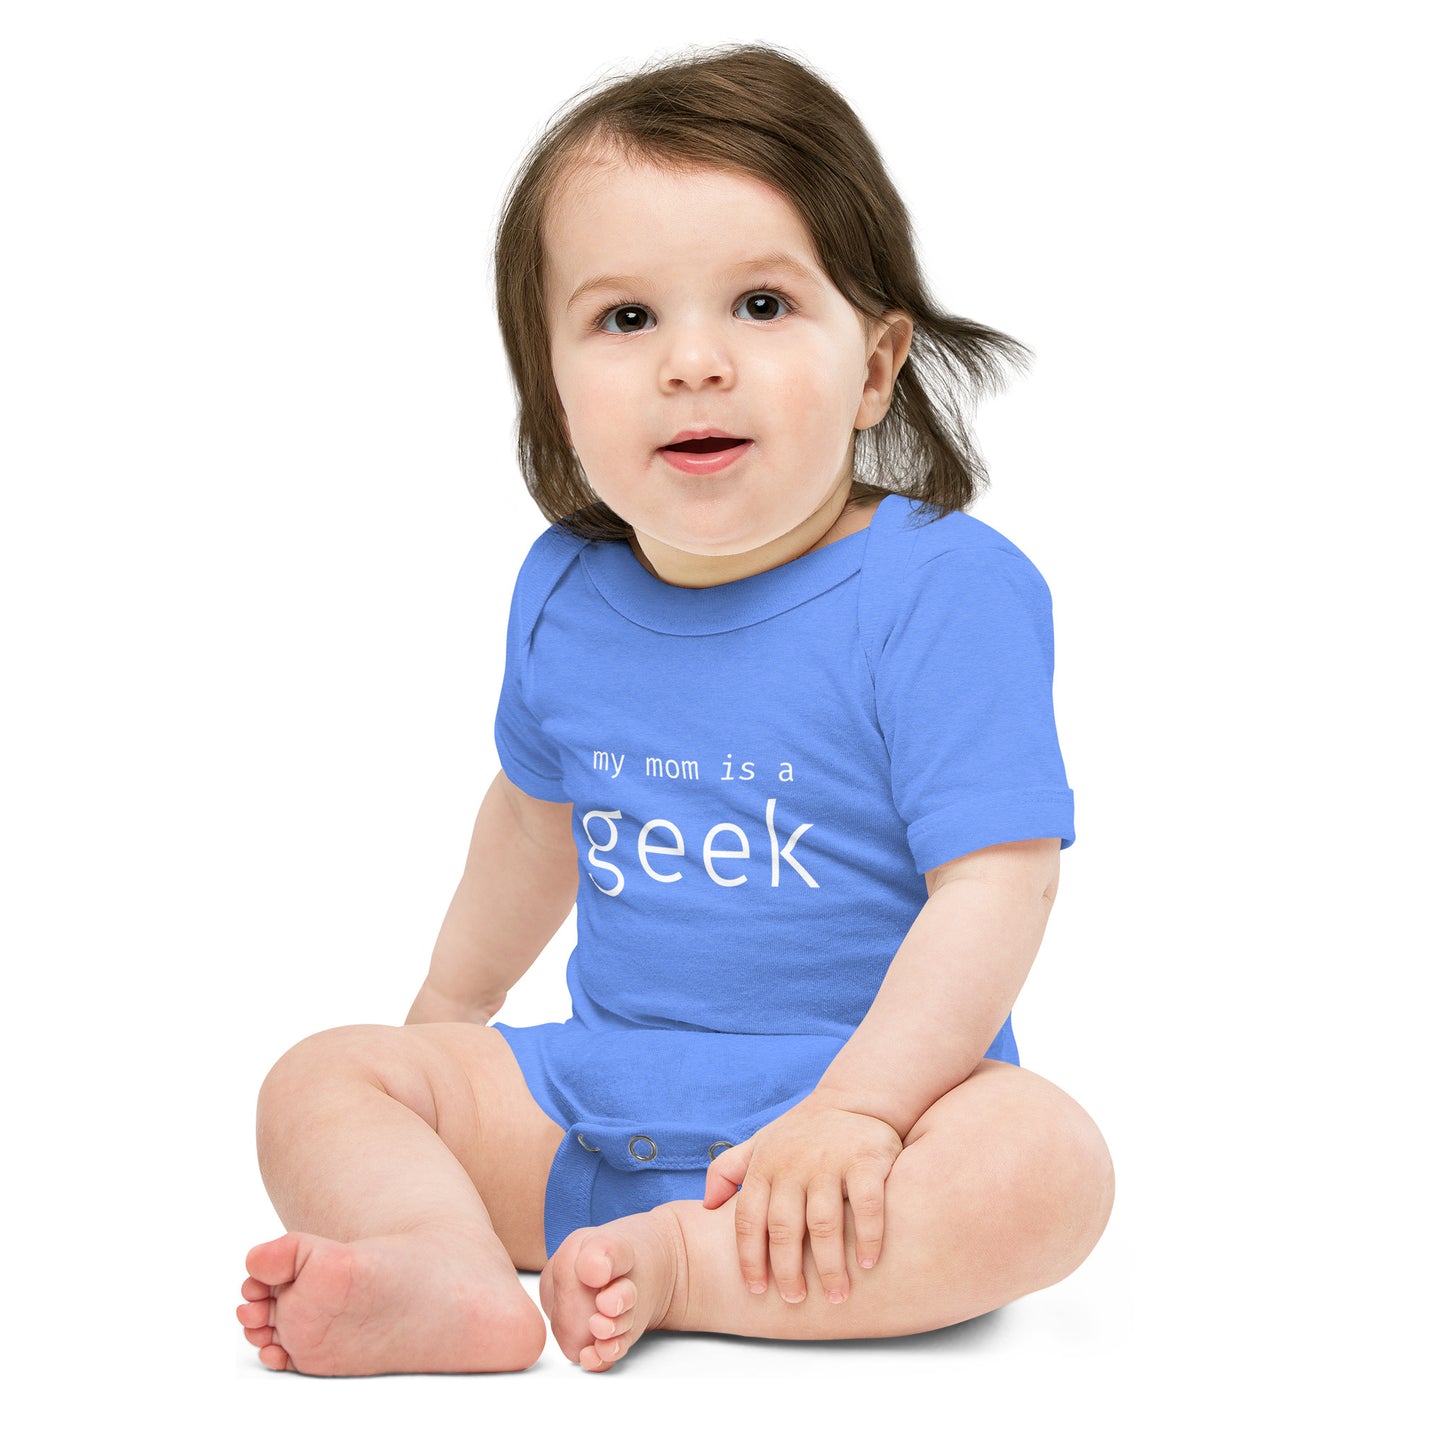 My mom is a geek - White Text - Baby short sleeve one piece